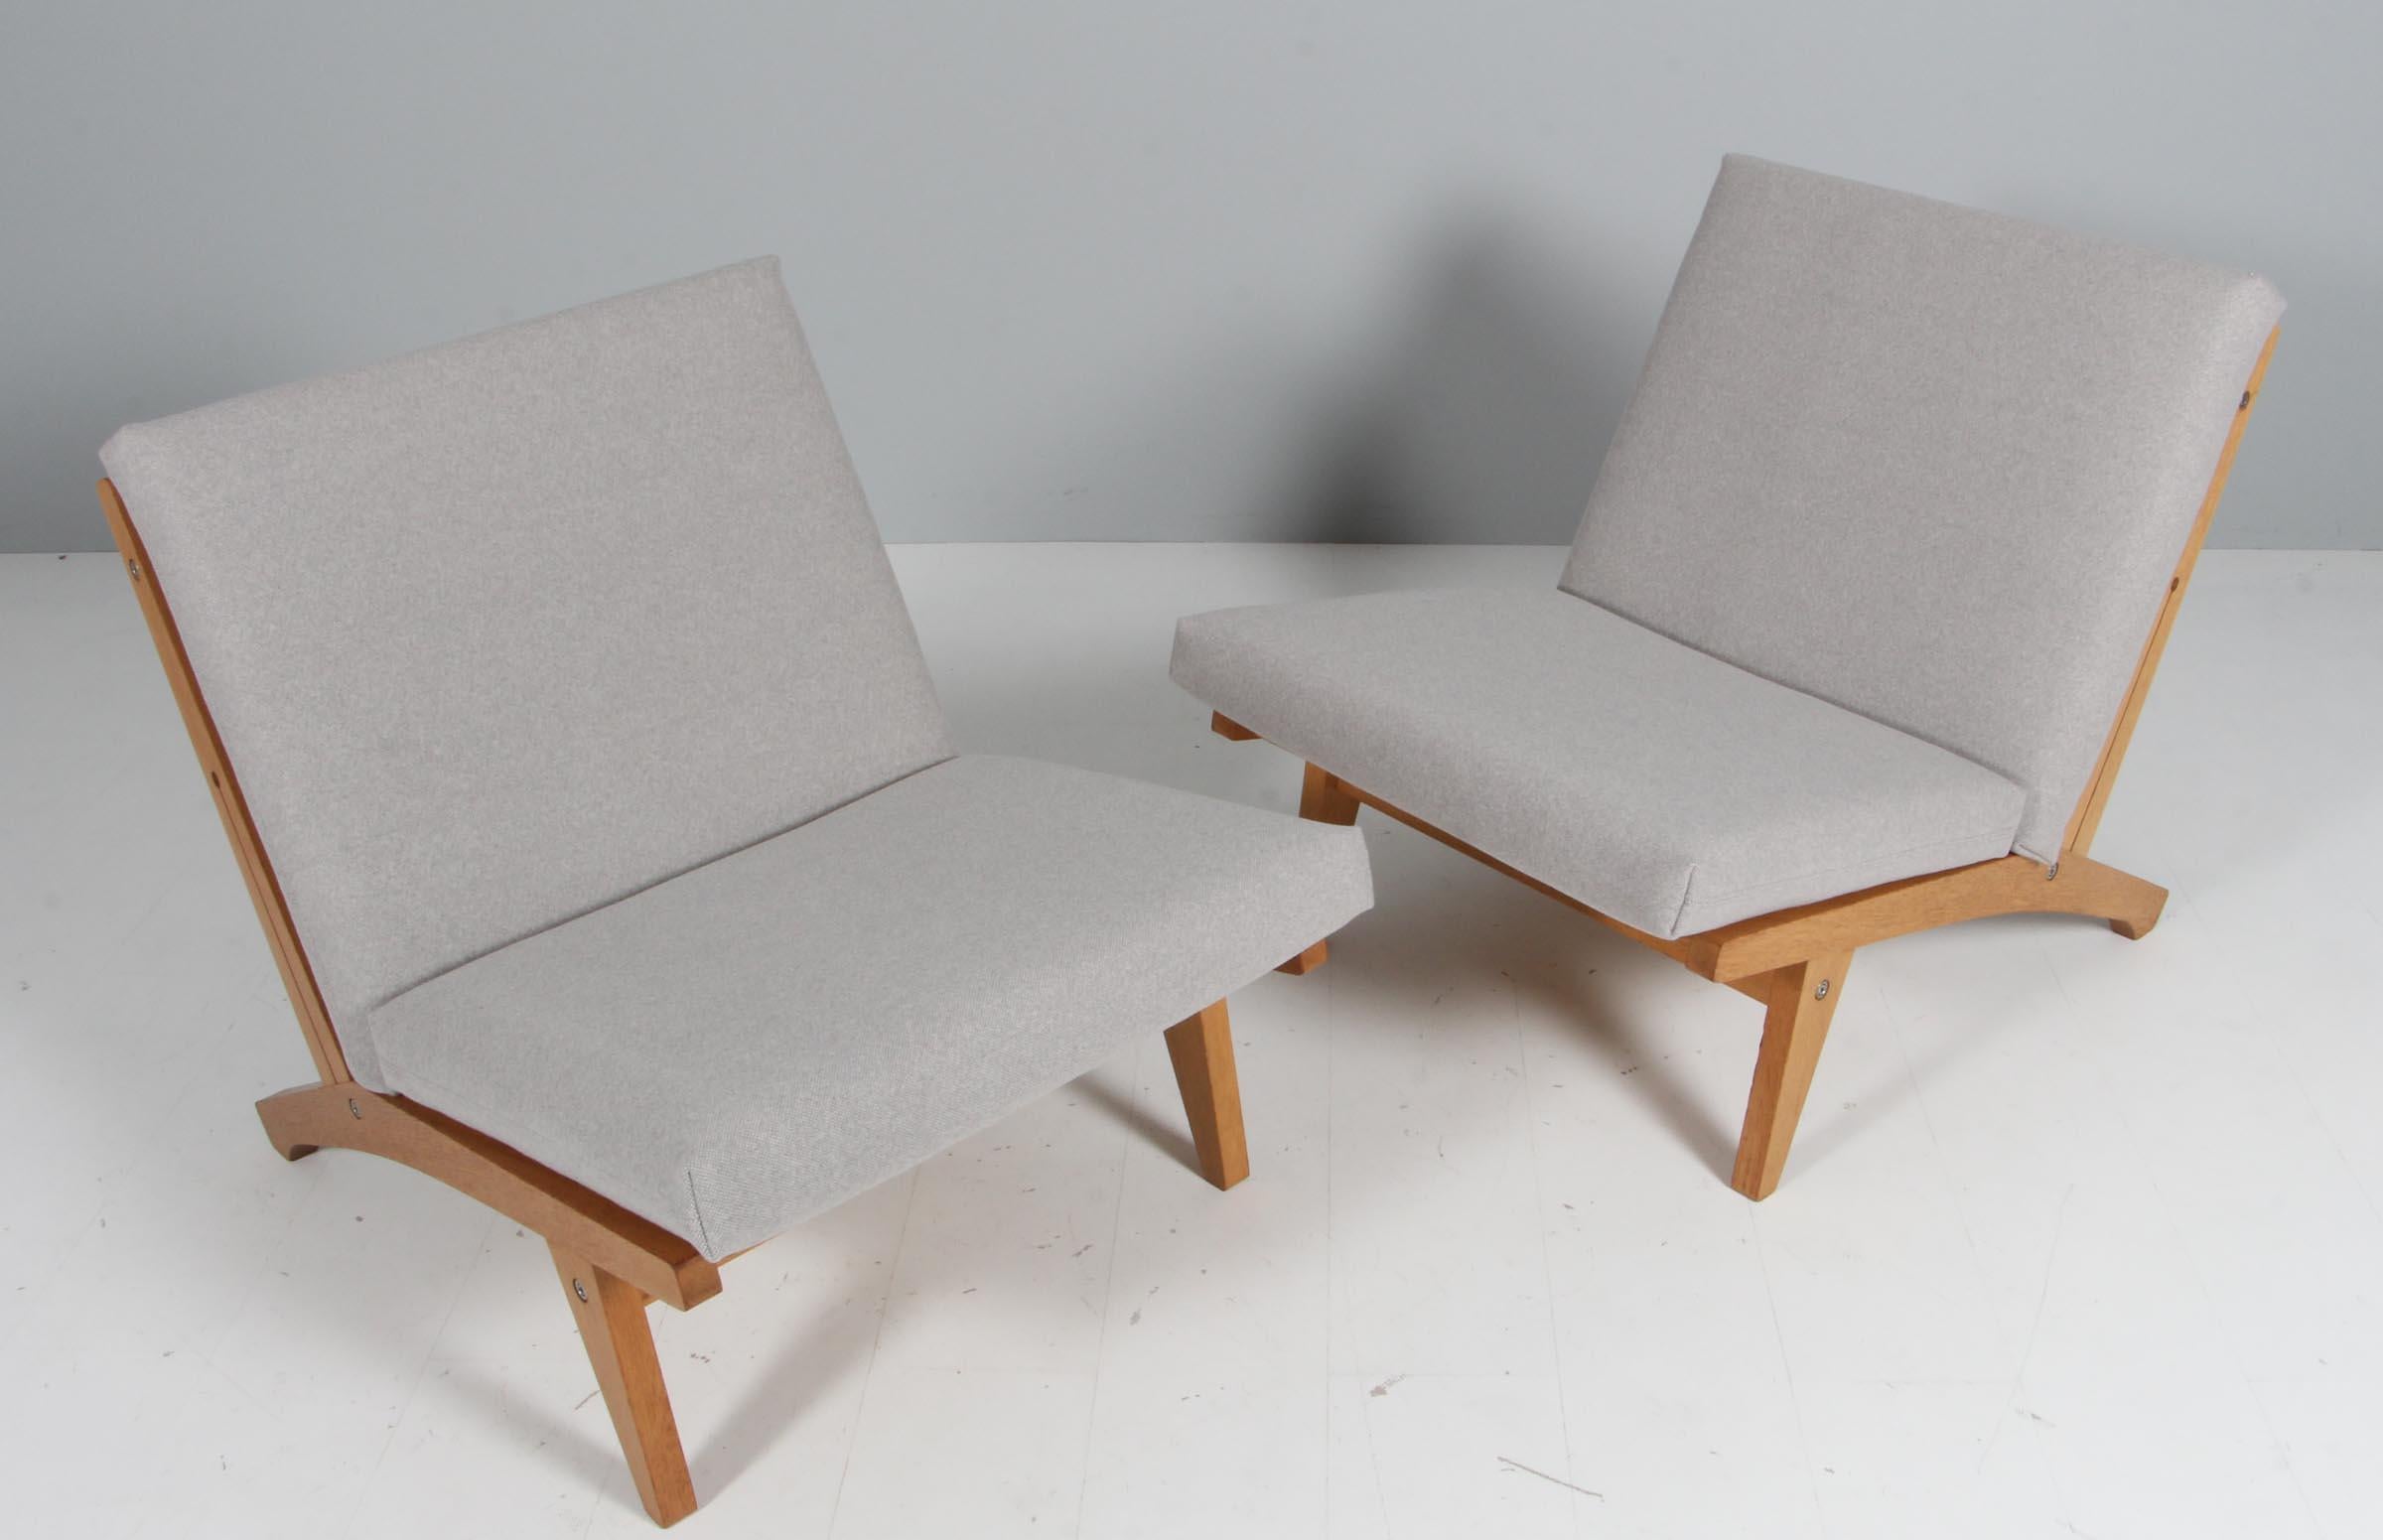 Hans J. Wegner lounge chairs with loose cushions new upholstered with grey 130 Antifabric wool from Kvadrat.

Frame of solid oak

Model GE-370, made by GETAMA.